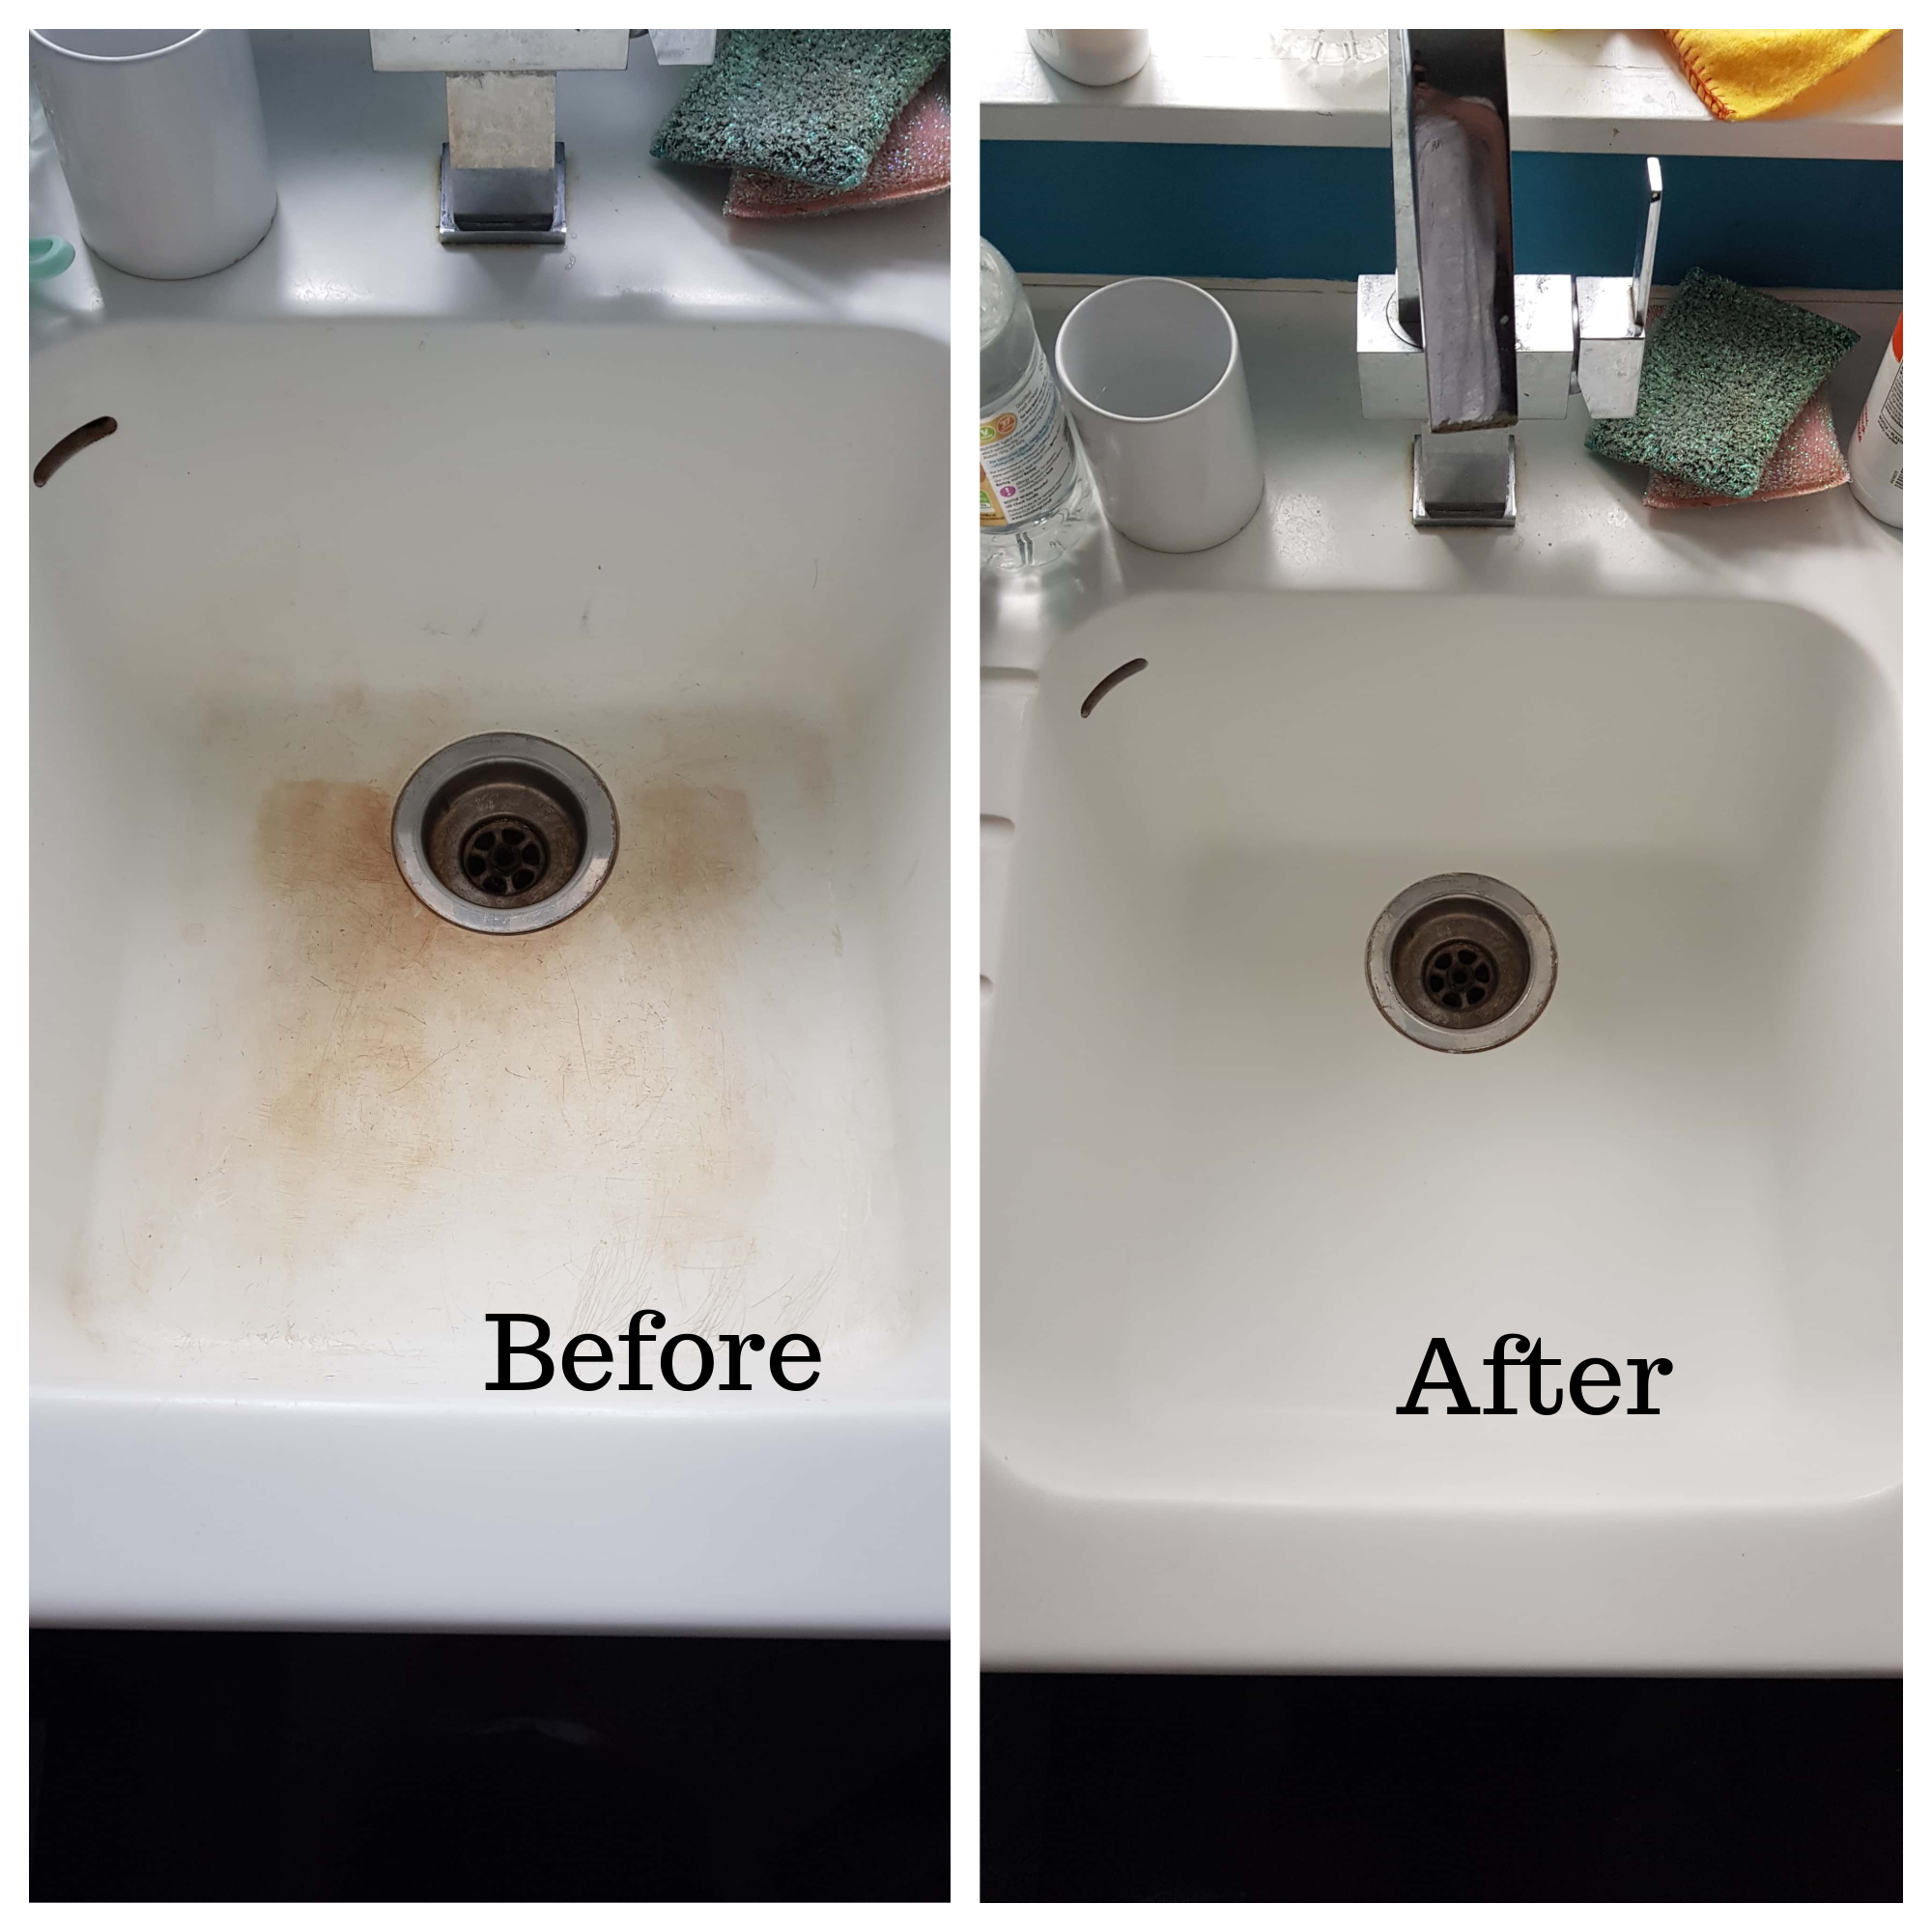 Corian Worktop Stains Removed In London, How To Fix Corian Countertop Scratches